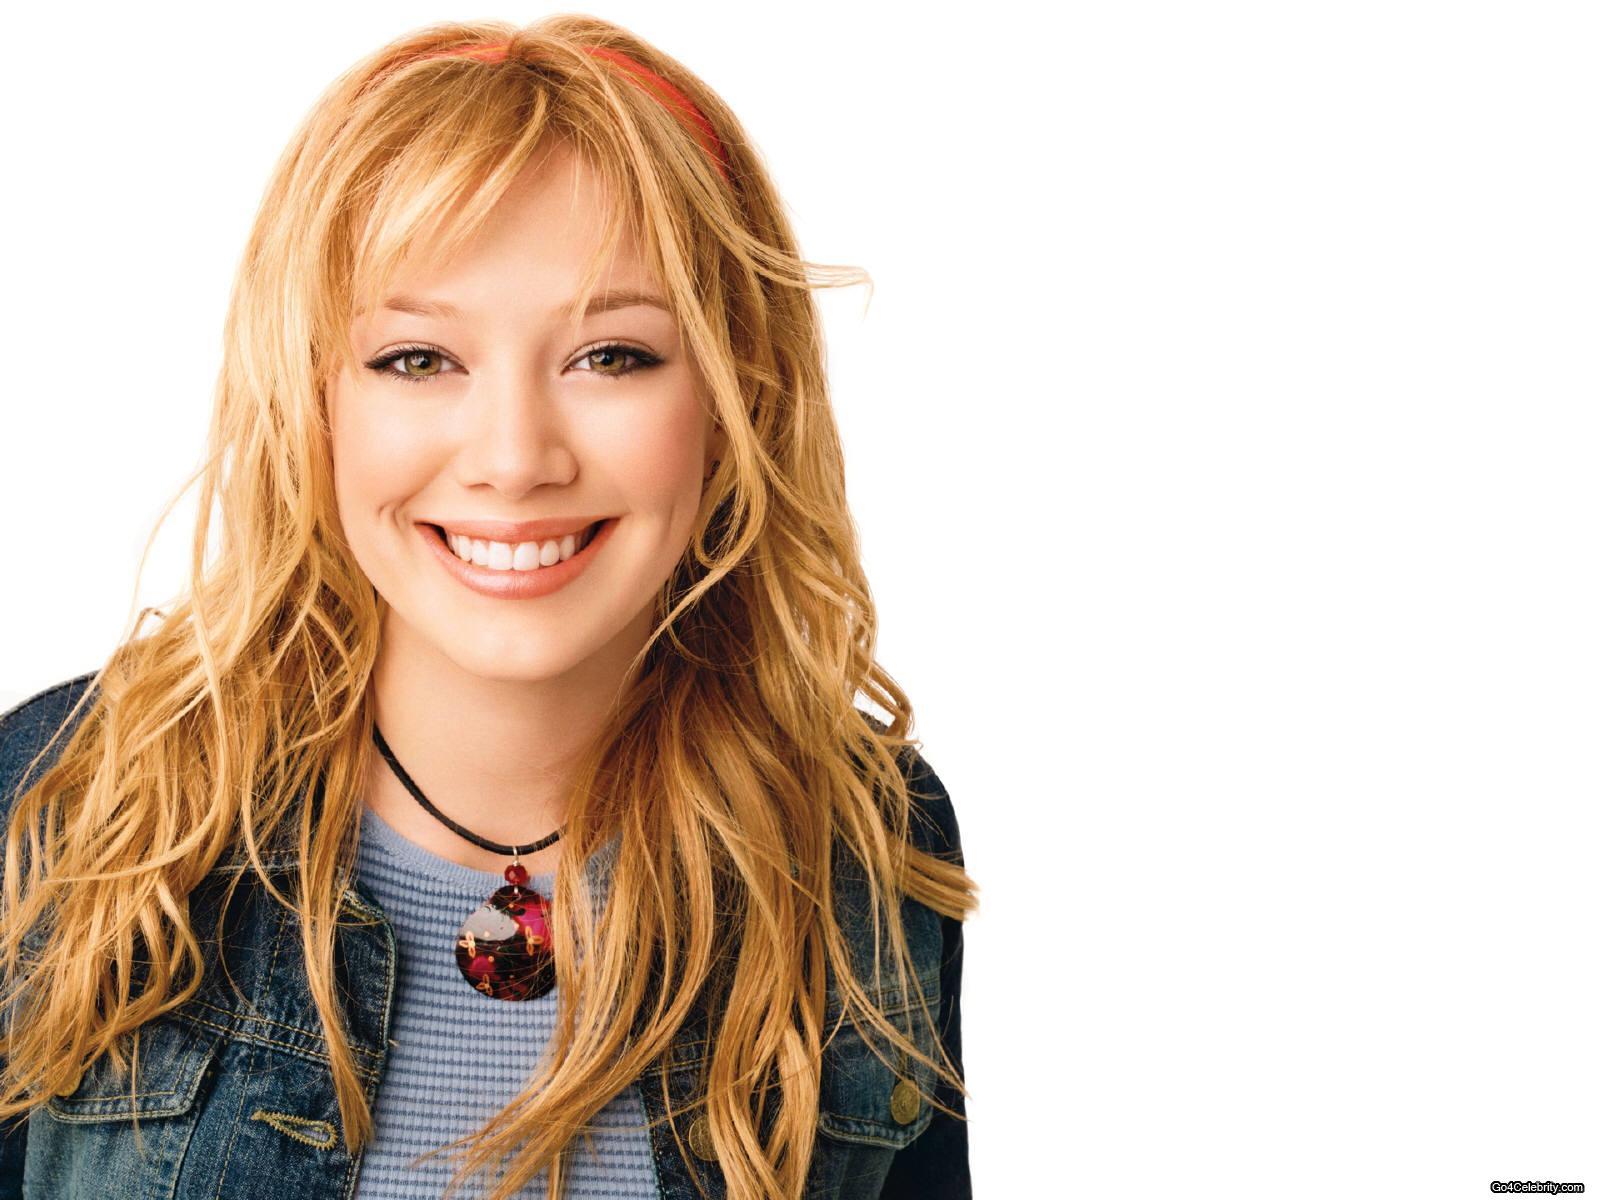 Hilary Duff in The Lizzie McGuire Movie